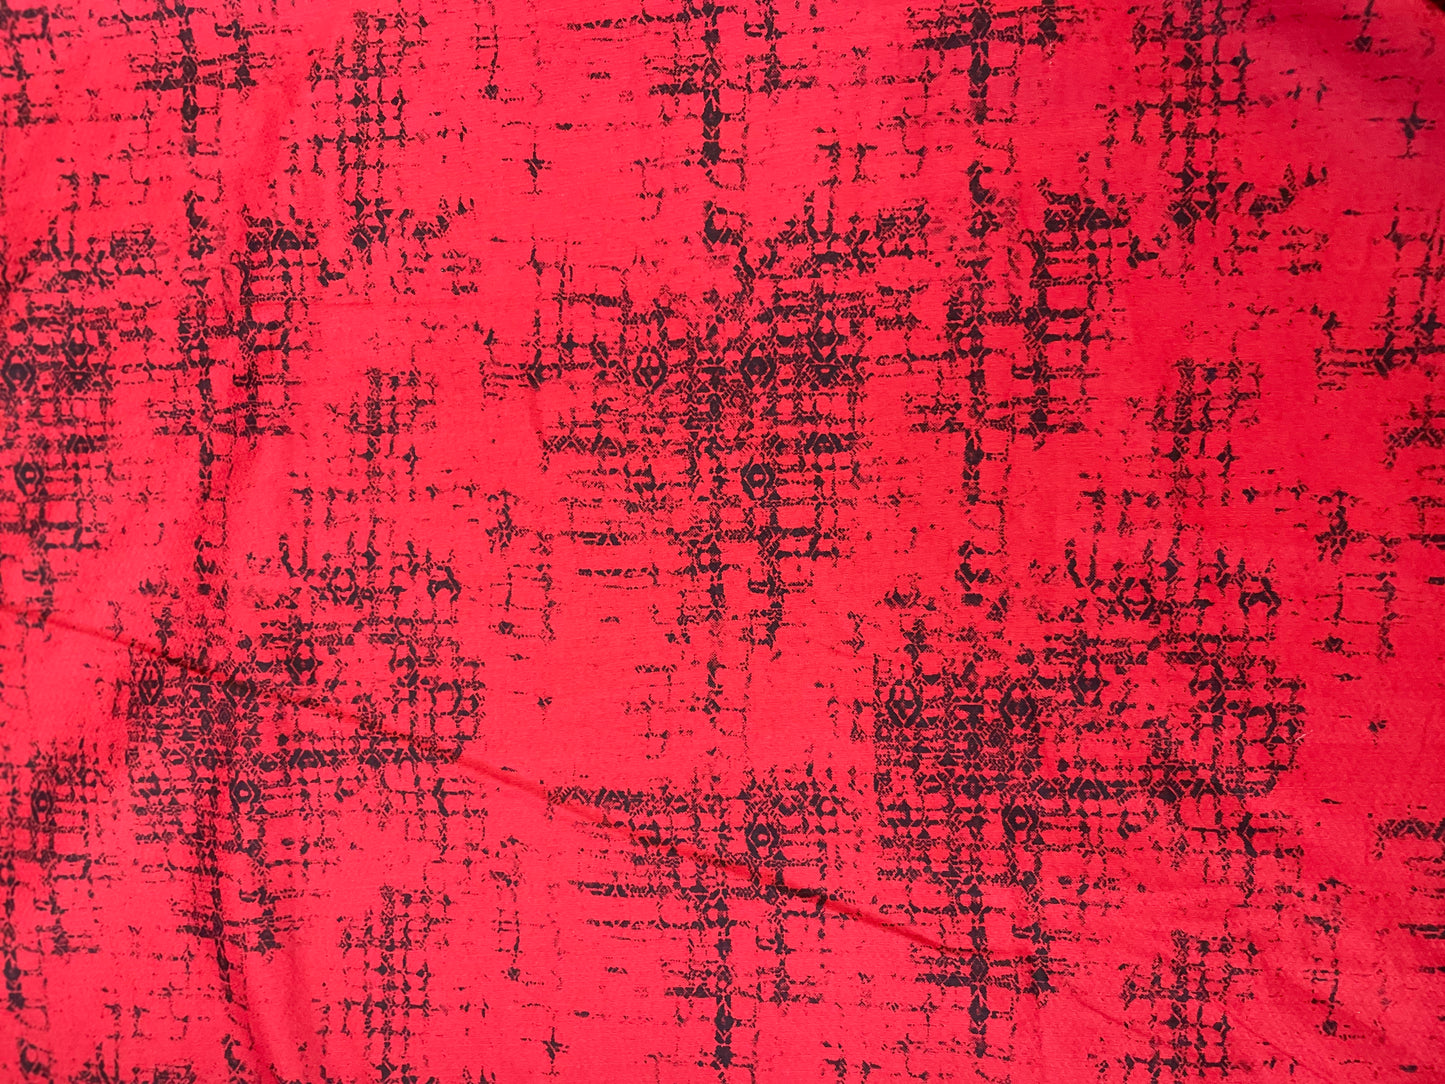 Abstract Grid Pattern Cotton Poplin Calico - Red / Black